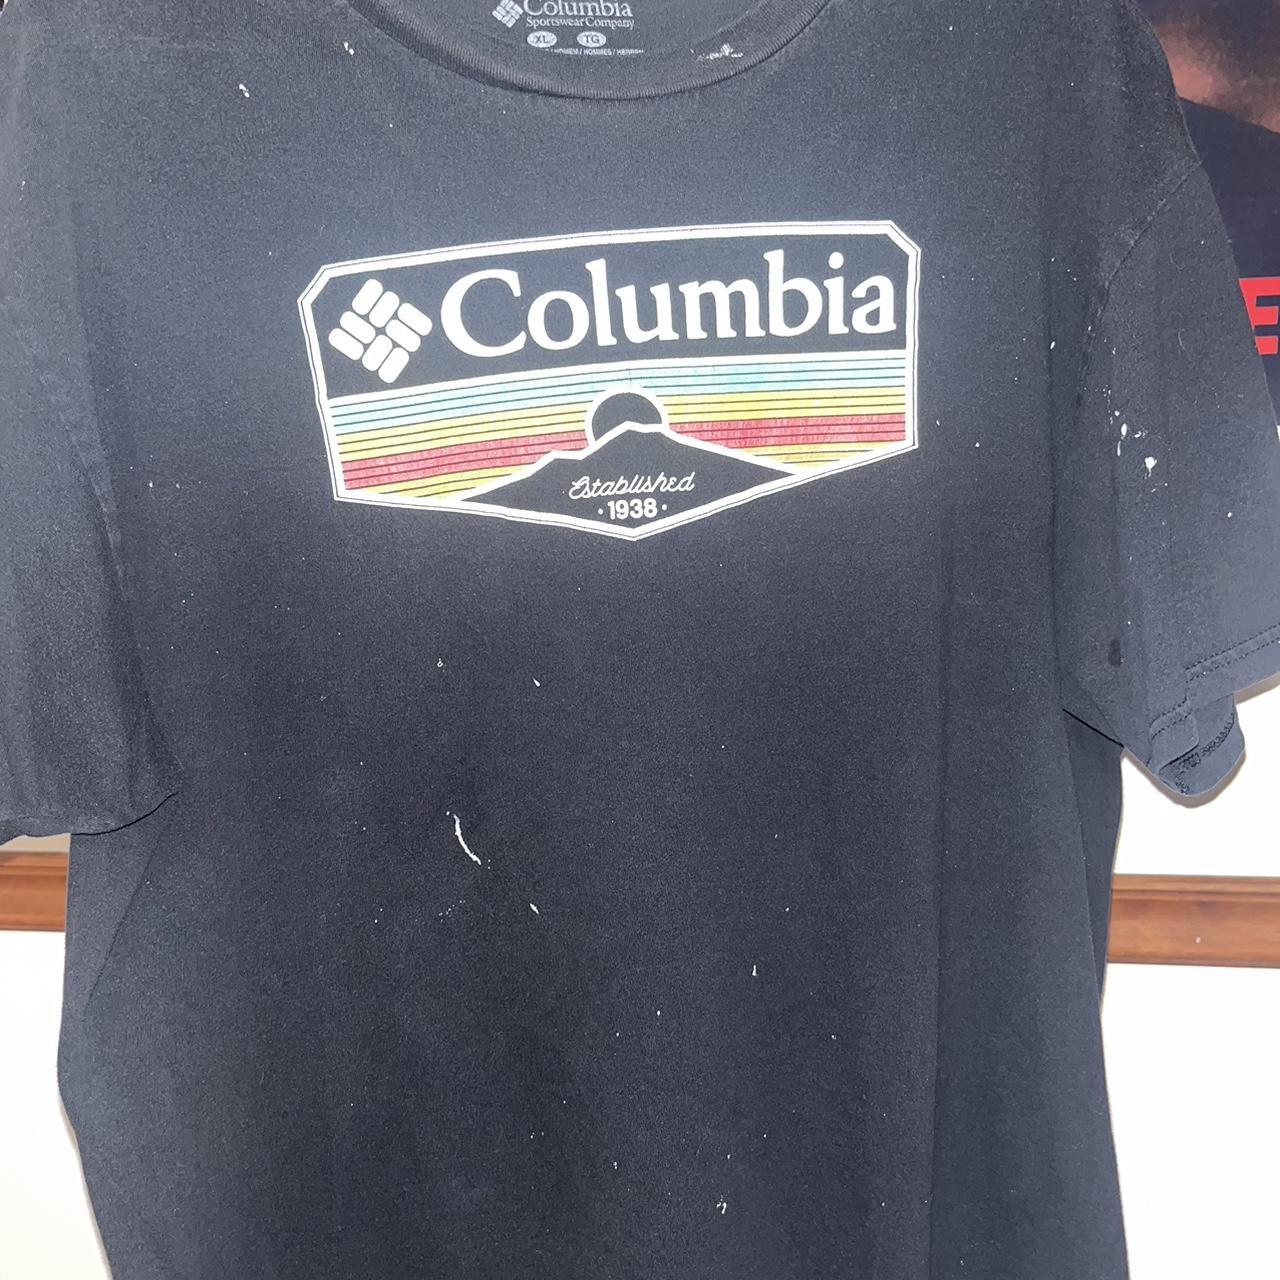 Columbia black XL shirt covered in white paint